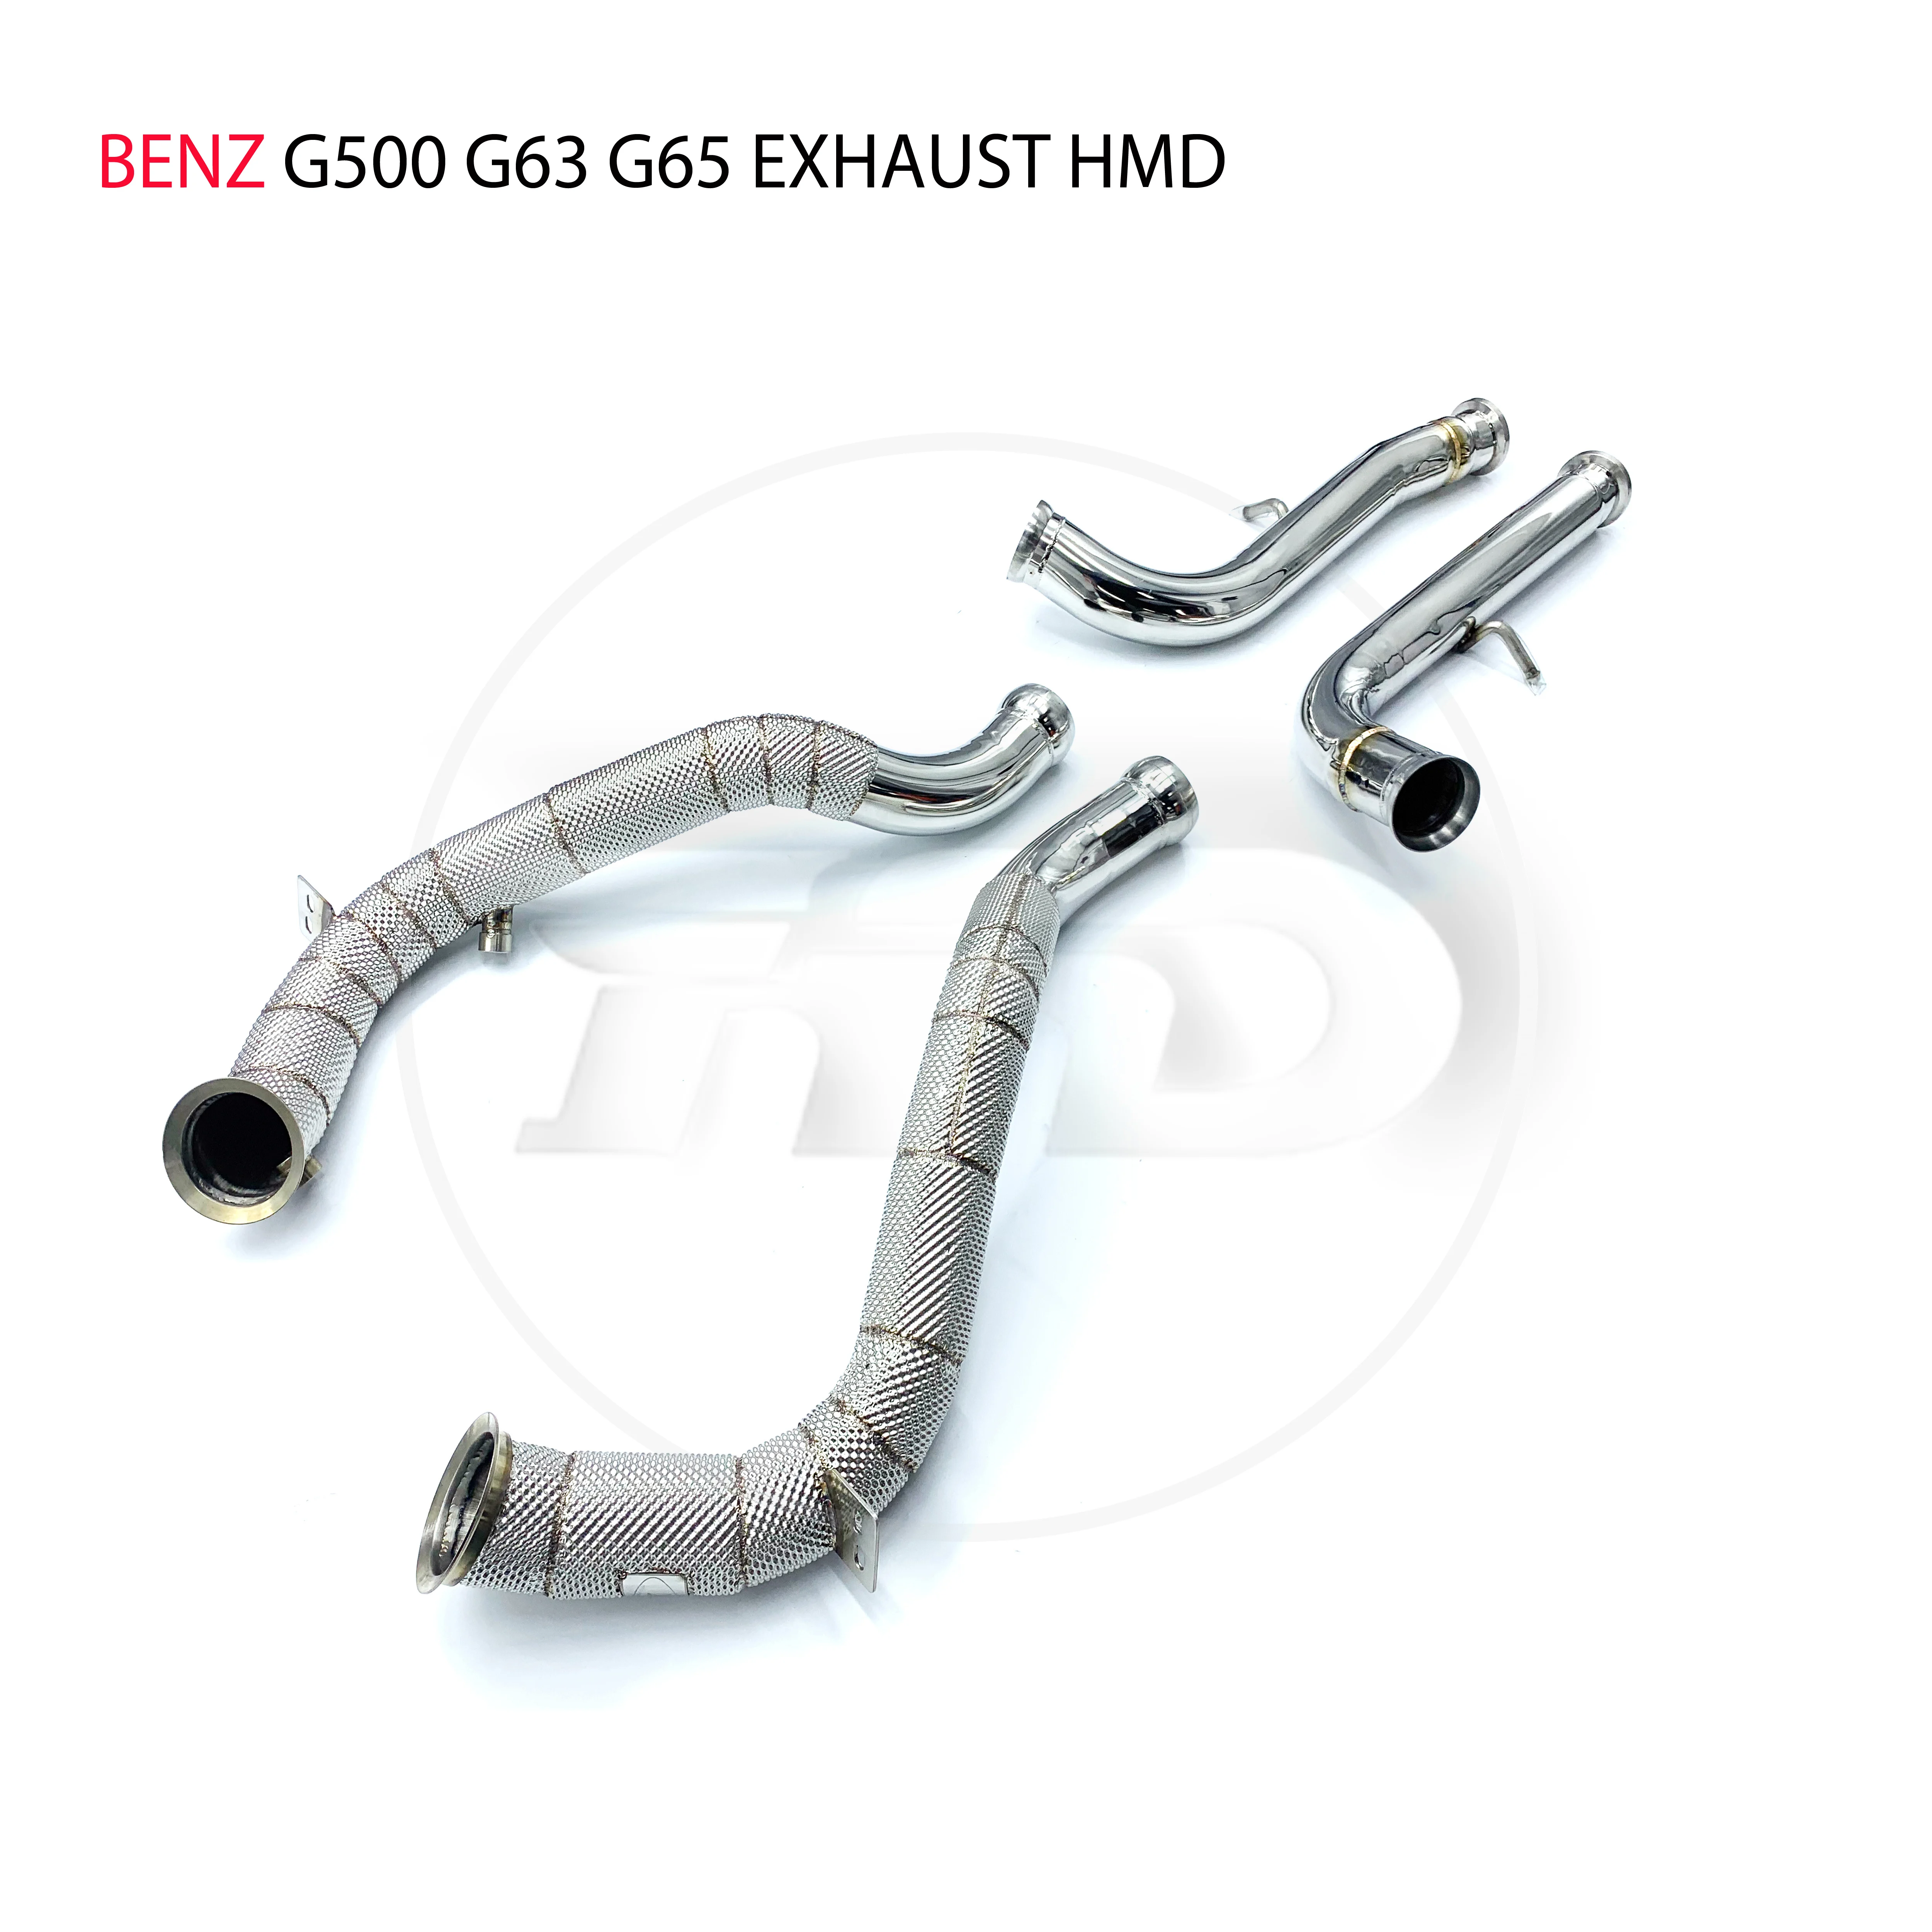 

HMD Stainless Steel Exhaust System High Flow Performance Downpipe For Benz G500 G63 G65 Modification Electronic Valve